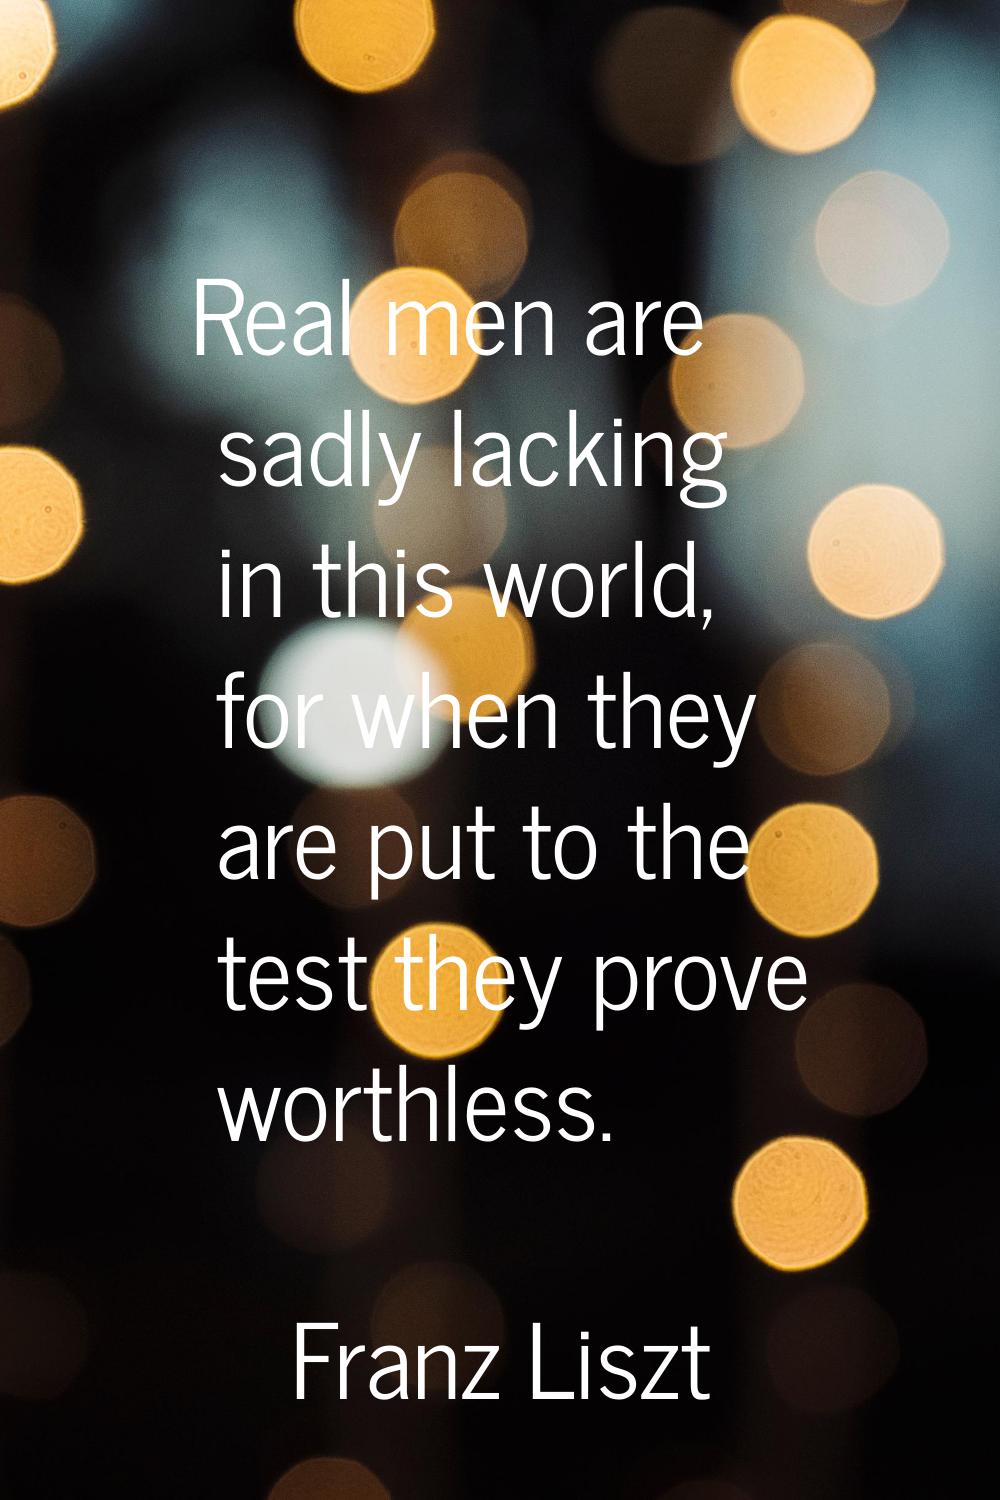 Real men are sadly lacking in this world, for when they are put to the test they prove worthless.